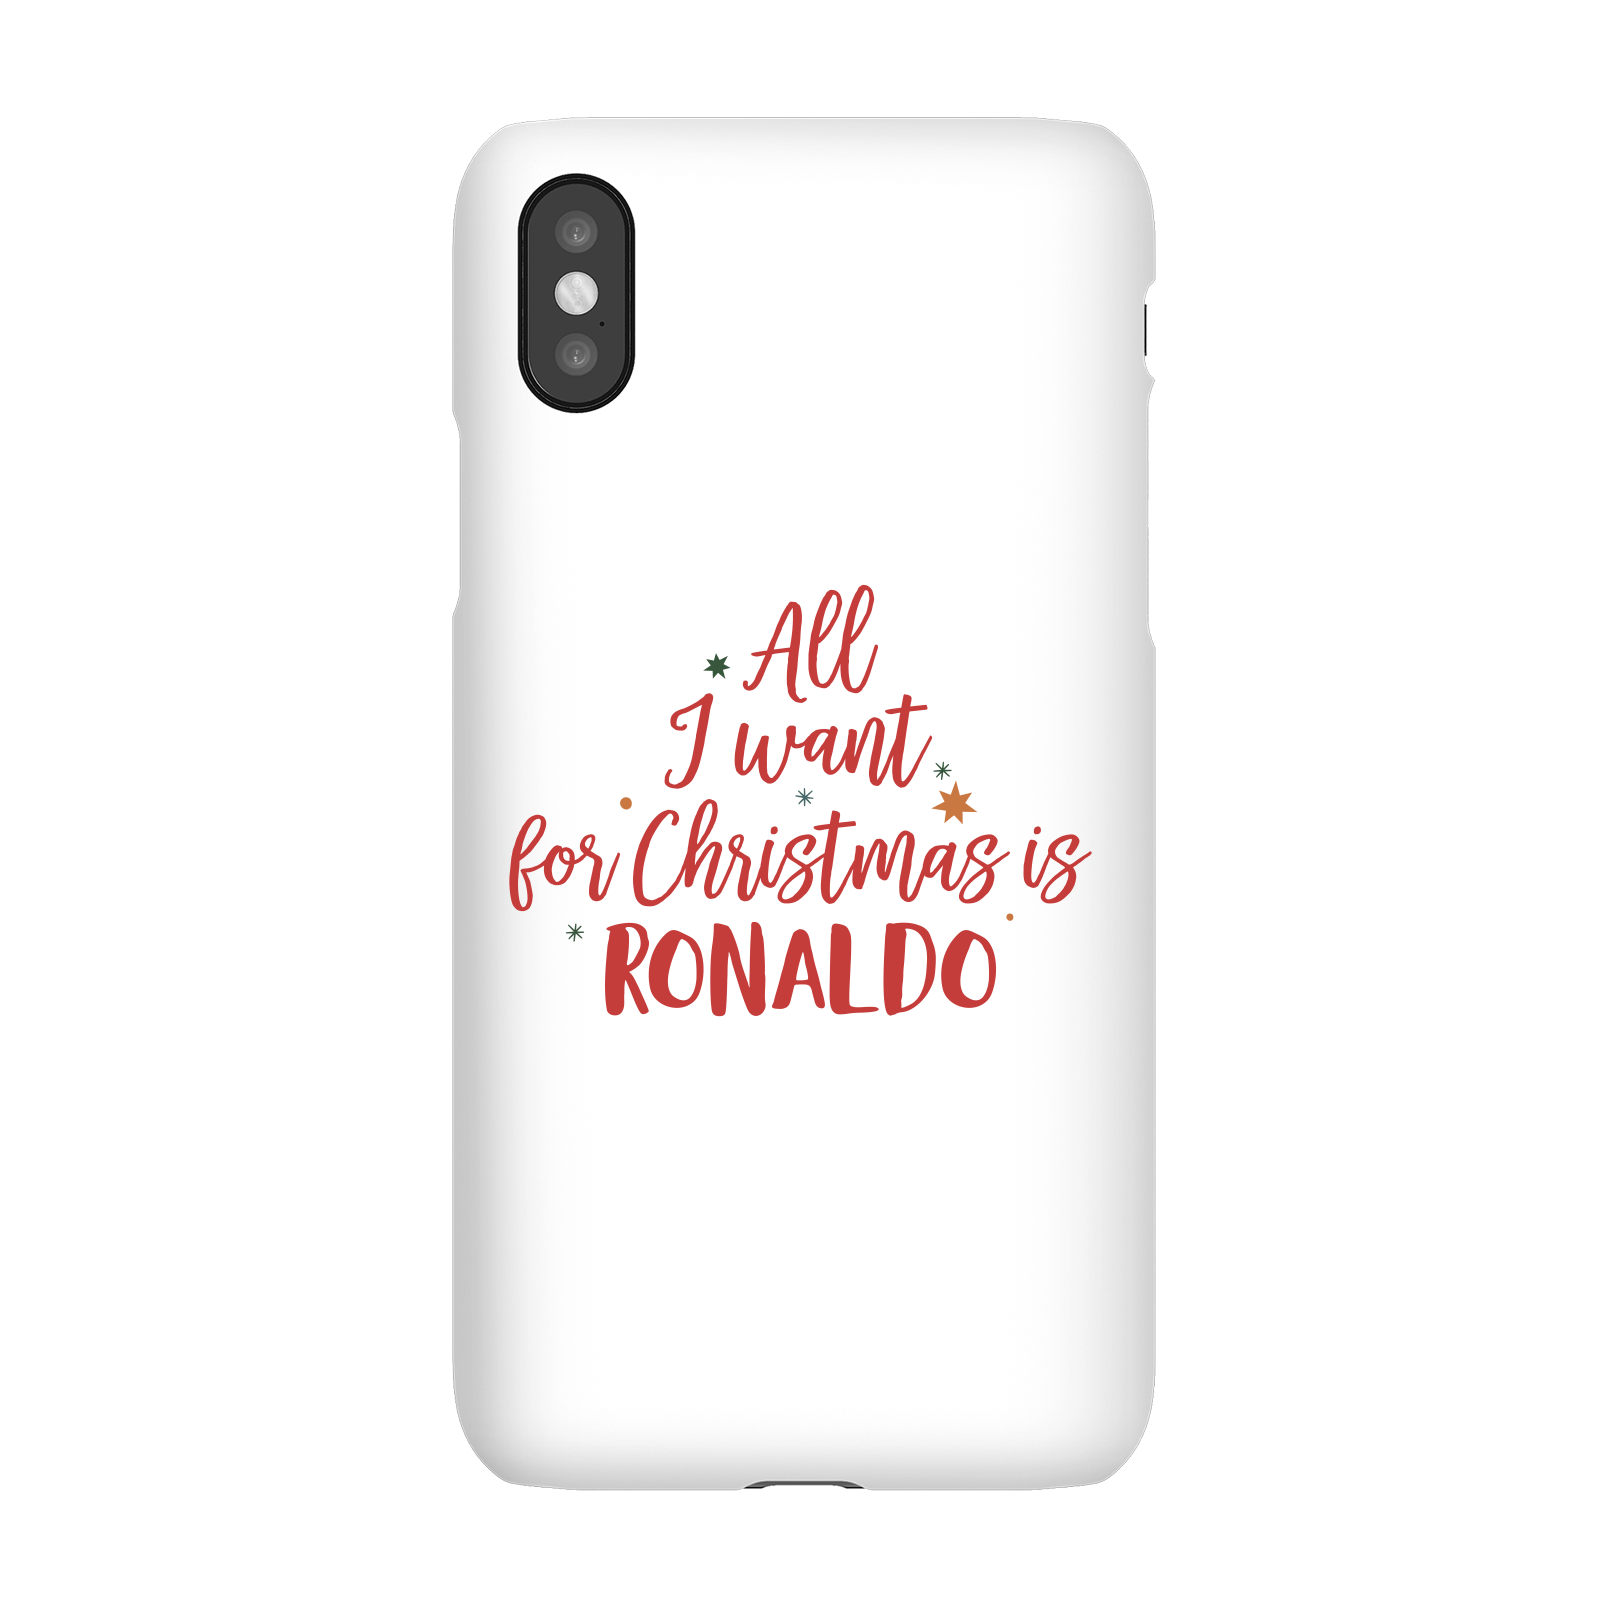 All I Want For Christmas Is Ronaldo Phone Case for iPhone and Android - iPhone 5/5s - Snap Case - Matte